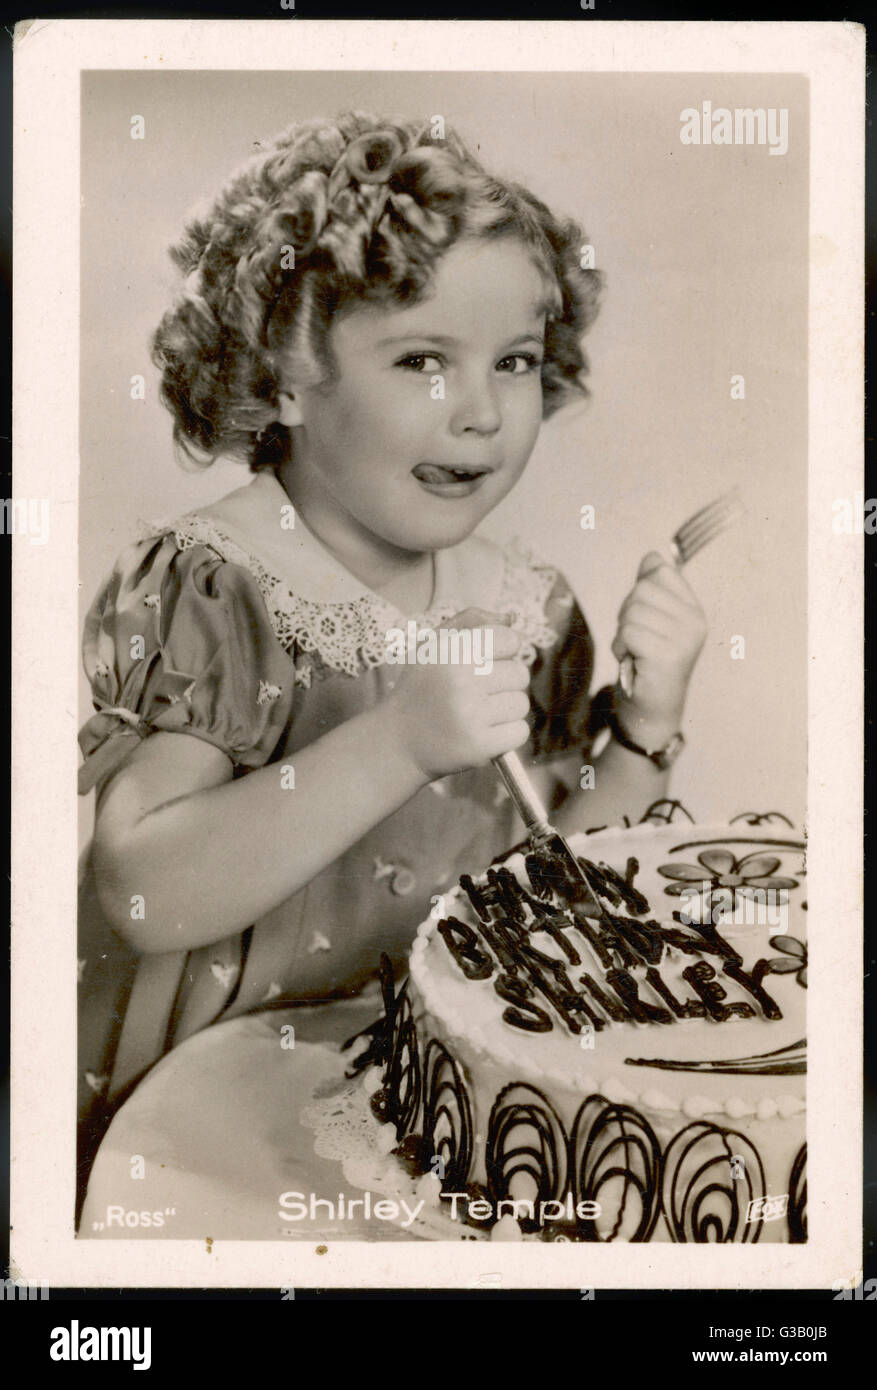 SHIRLEY TEMPLE  (1928 -2014), American child star of the 1930s, tucking into her birthday cake      Date: 1930s Stock Photo